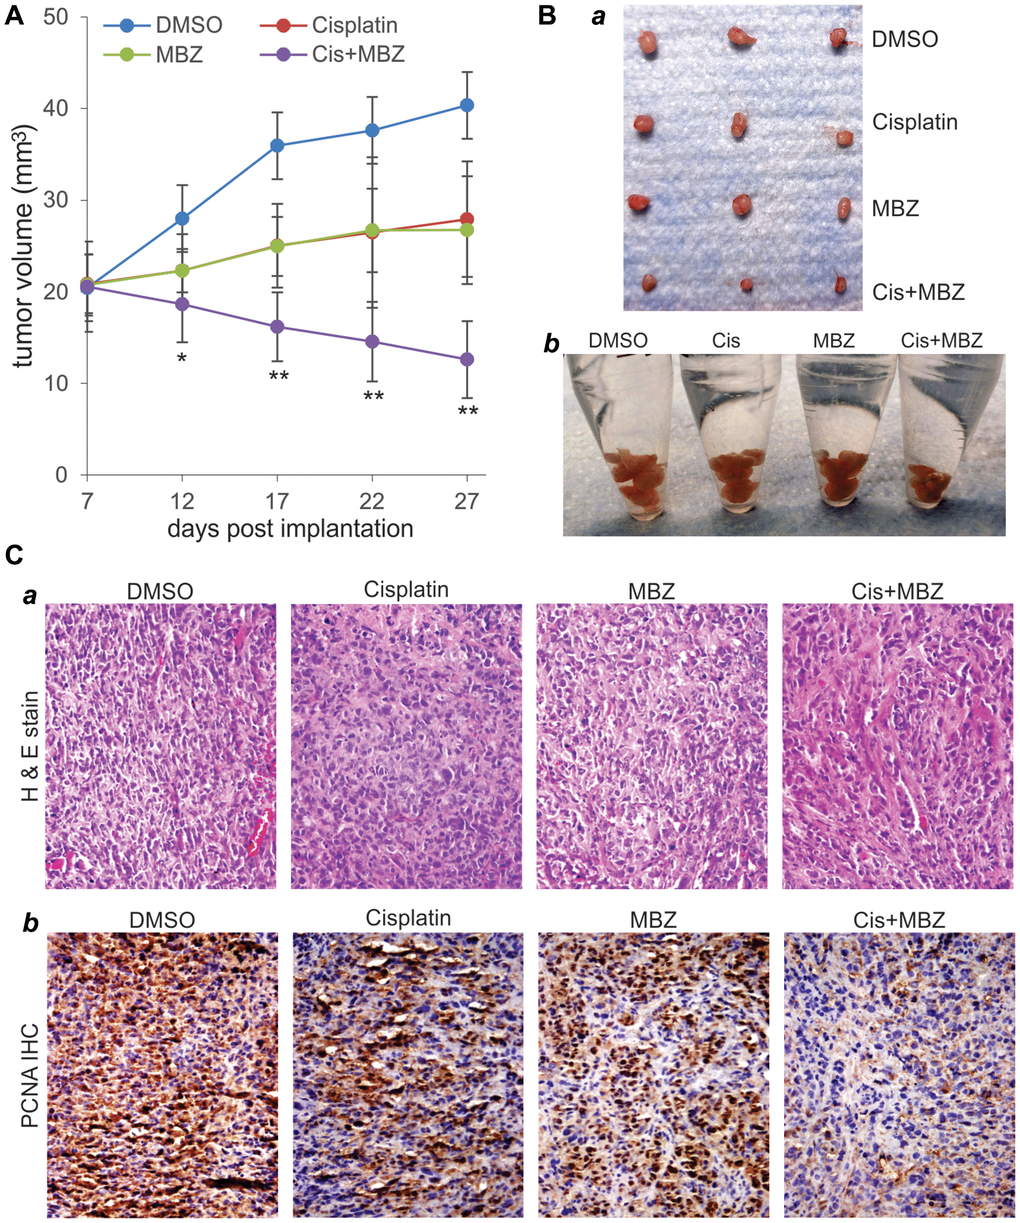 MBZ and cisplatin synergistically inhibit tumor growth in the xenograft tumor model of human CR ovarian cancer cells. Exponentially growing SKOV3CR cells were collected and subcutaneously injected into the flanks of athymic nude mice (n = 6 per group). At 7 days post injection, the mice were randomly divided into four groups, and treated with DMSO, MBZ, and/or Cisplatin (Cis) for three weeks. Tumor growth was monitored and average tumor growth was calculated. (A) Representative retrieved tumor masses were photographed individually (B-a) or pooled in Eppendorf tubes. (B-b) The retrieved tumor masses were subjected to H & E staining (C-a), and anti-PCNA immunochemical staining (C-b). Minus primary antibody and control IgG were used as negative controls. Representative results are shown.